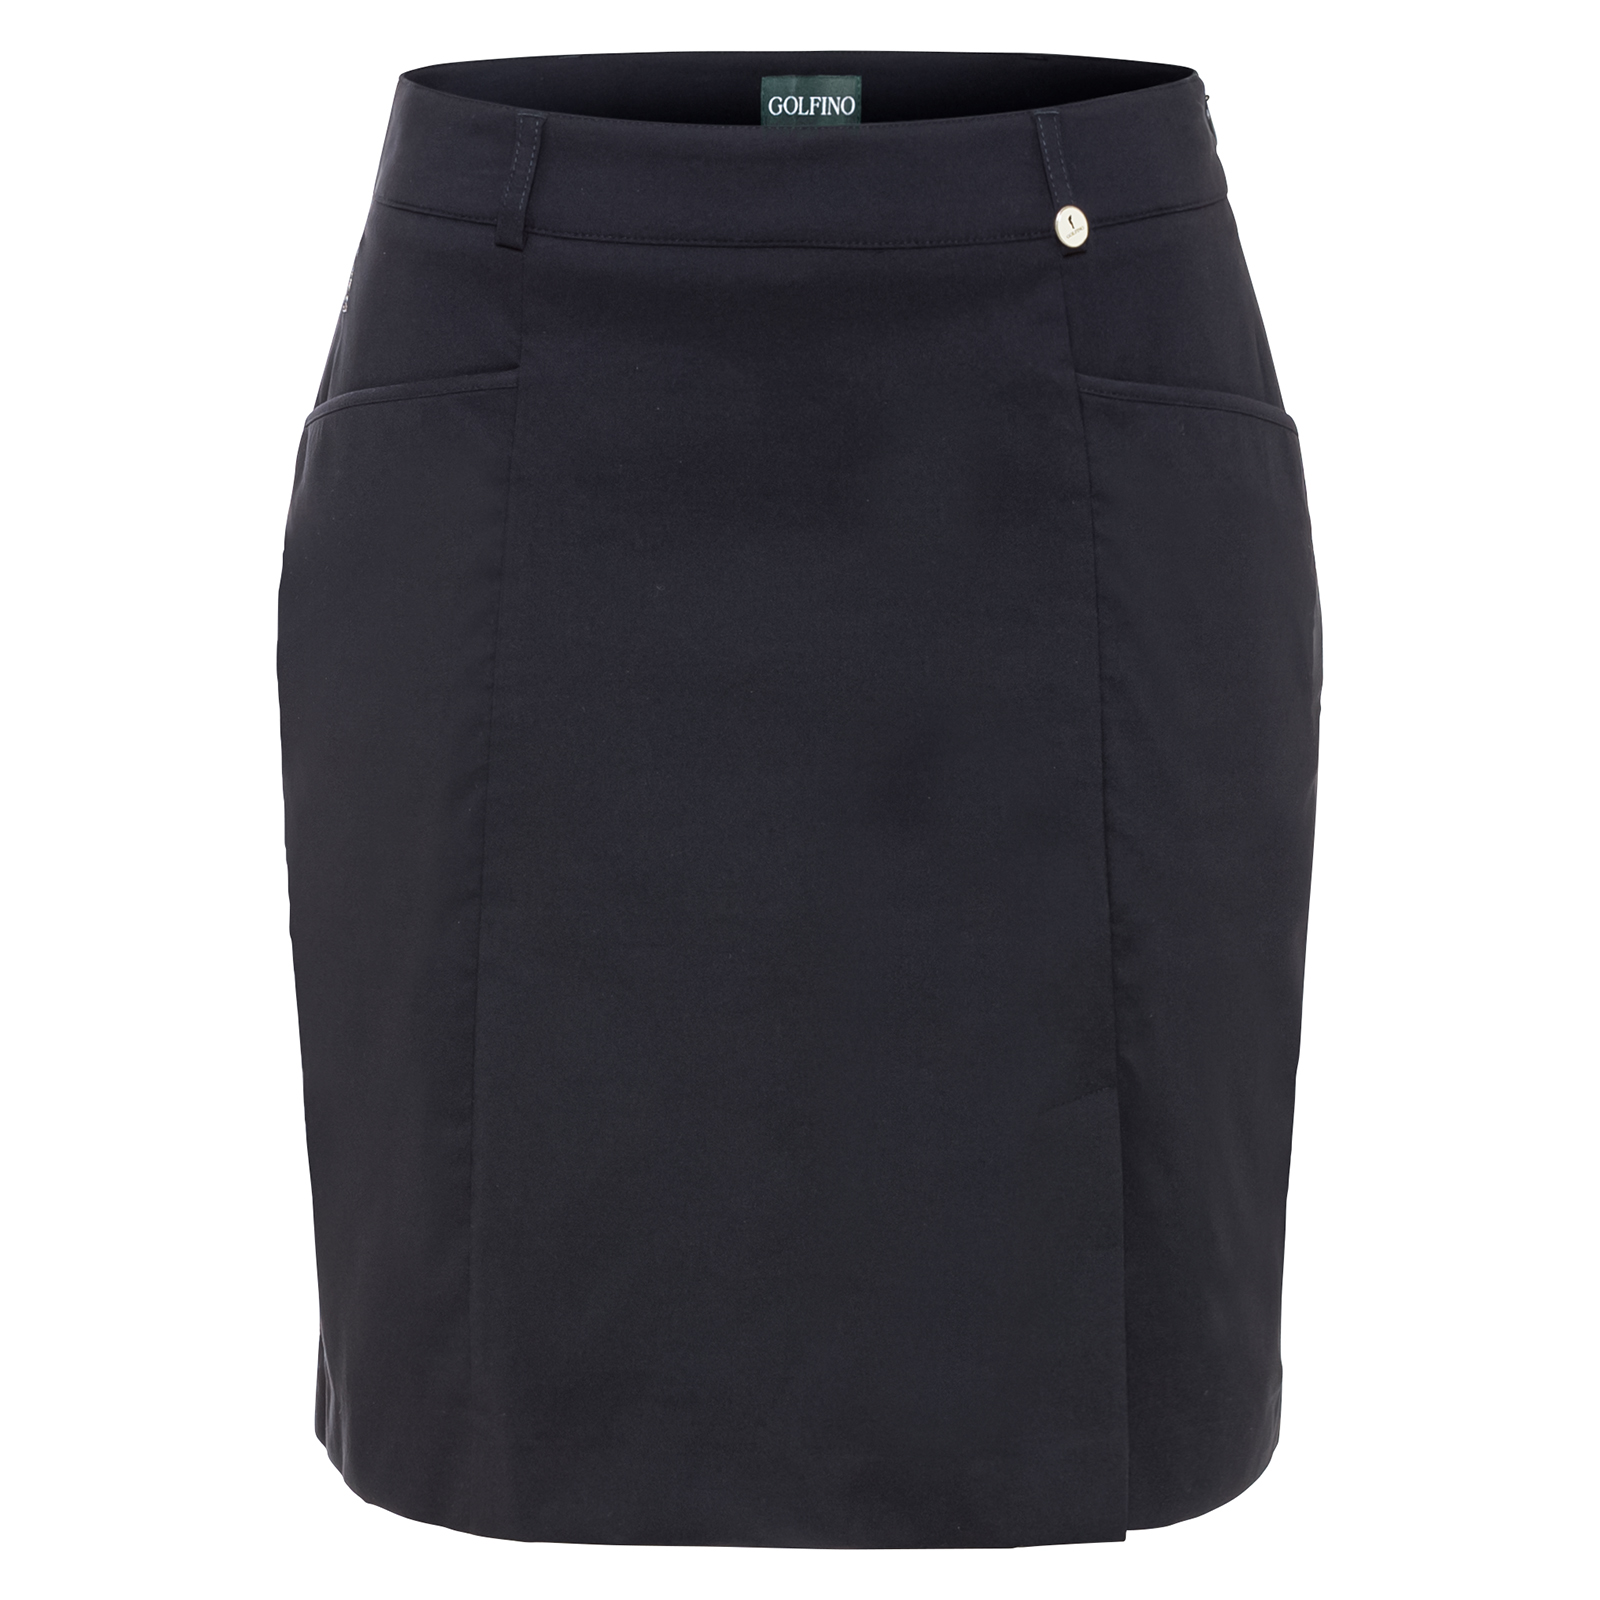 Ladies' skort made from stretch material with sun protection function